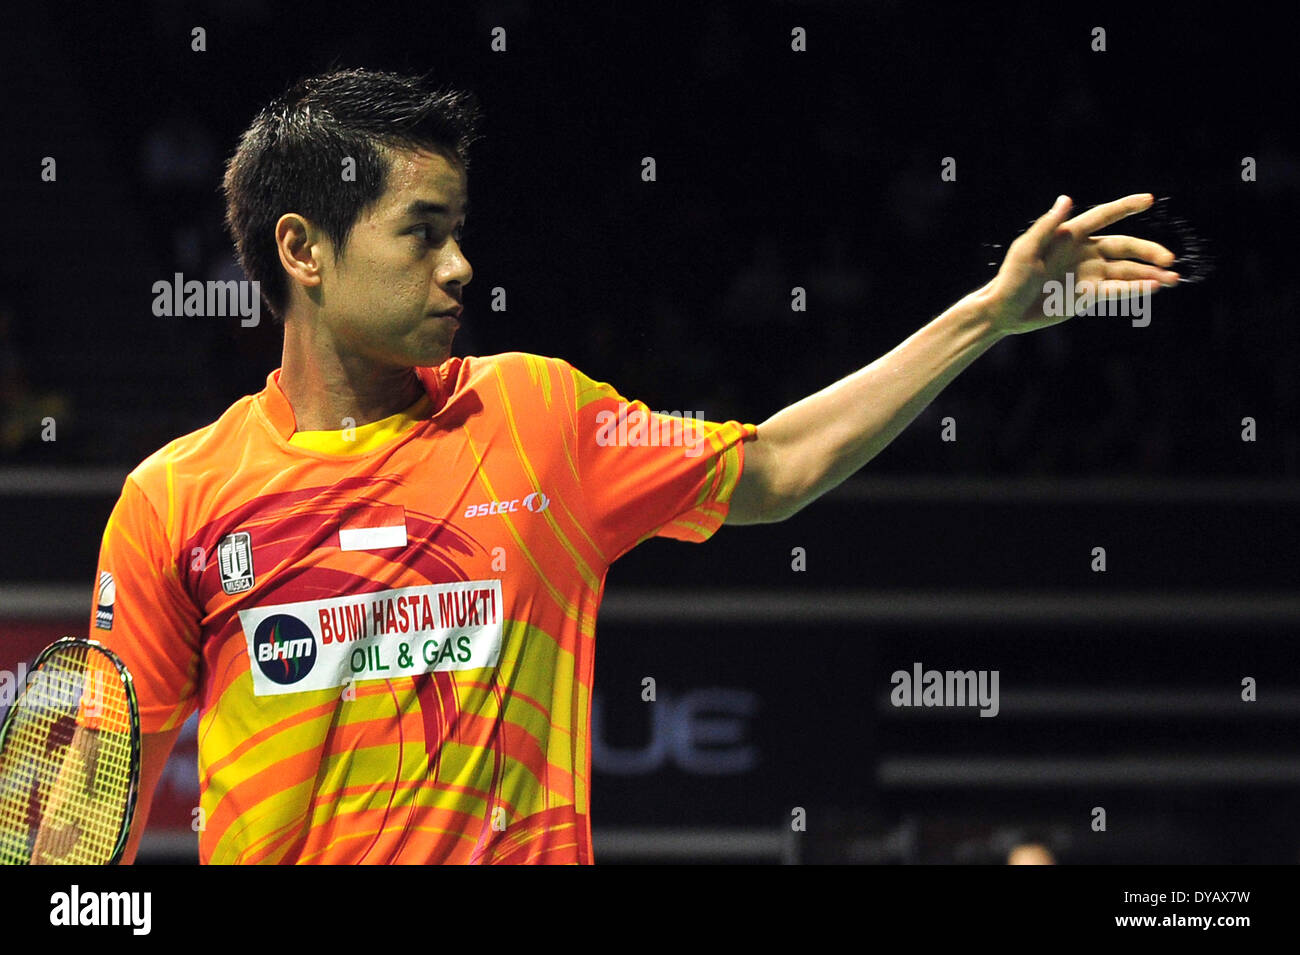 Singapore. 12th Apr, 2014. Simon Santoso of Indonesia reacts during the men's singles semi-final match at the OUE Singapore Open badminton tournament against Du Pengyu of China in Singapore, April 12, 2014. Simon Santoso won 2-1. Credit:  Then Chih Wey/Xinhua/Alamy Live News Stock Photo